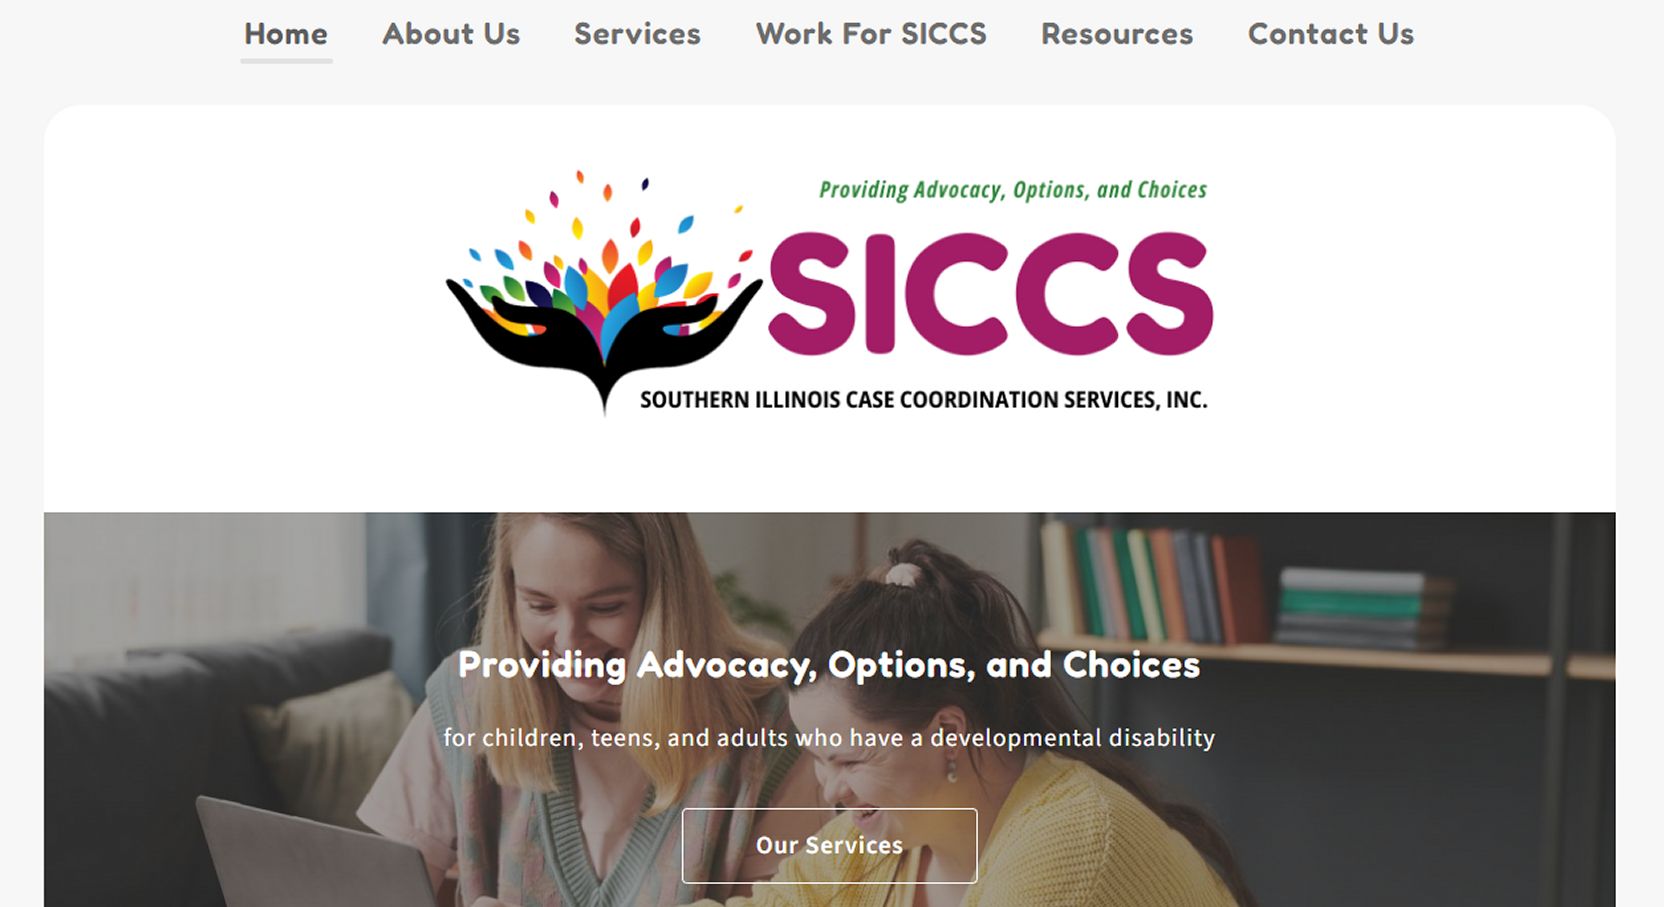 Southern Illinois Case Coordination Services, Inc. homepage screenshot